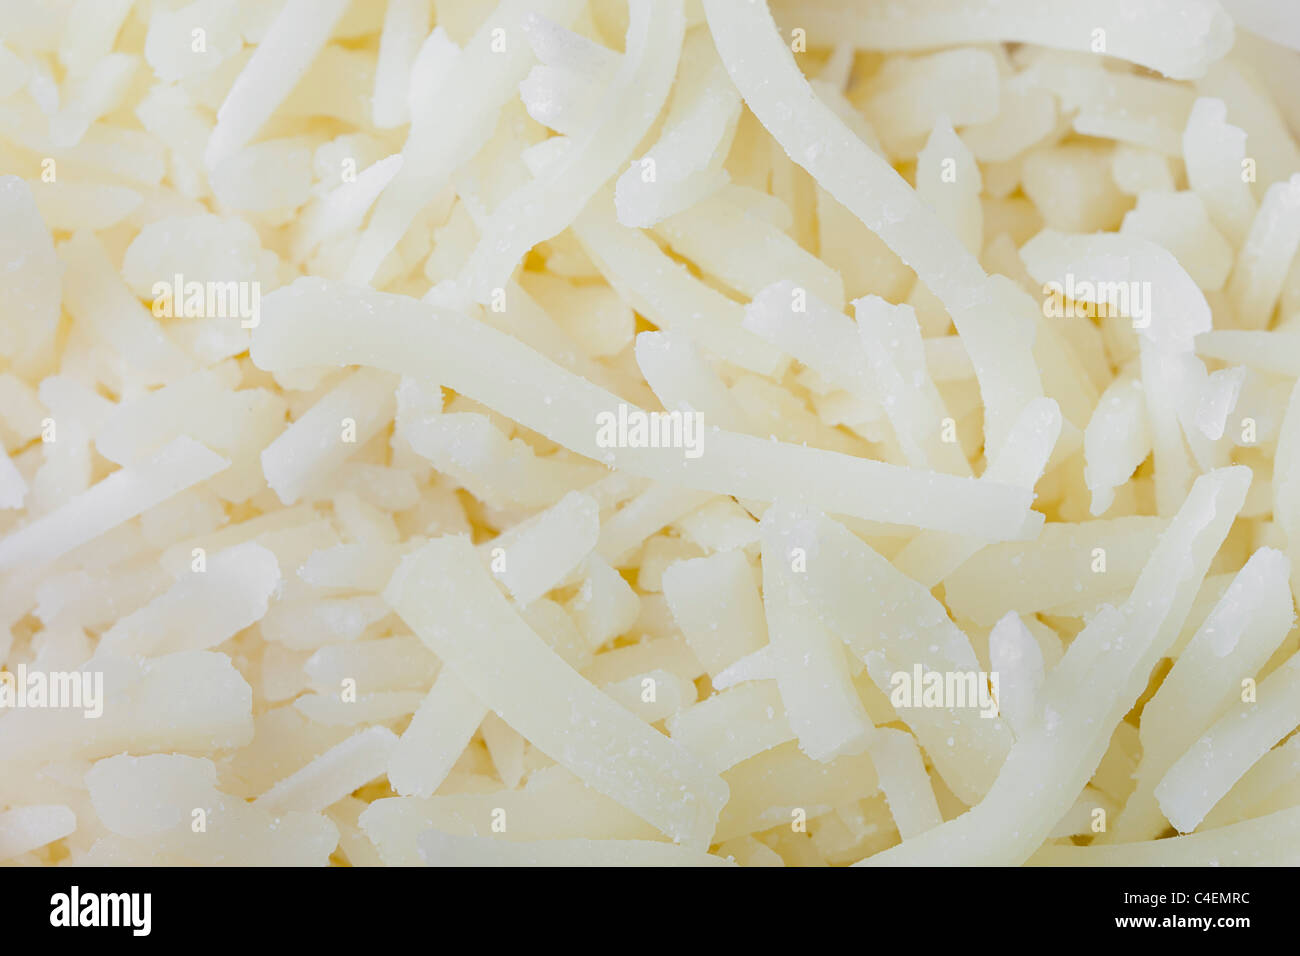 A shredded white cheese texture Stock Photo